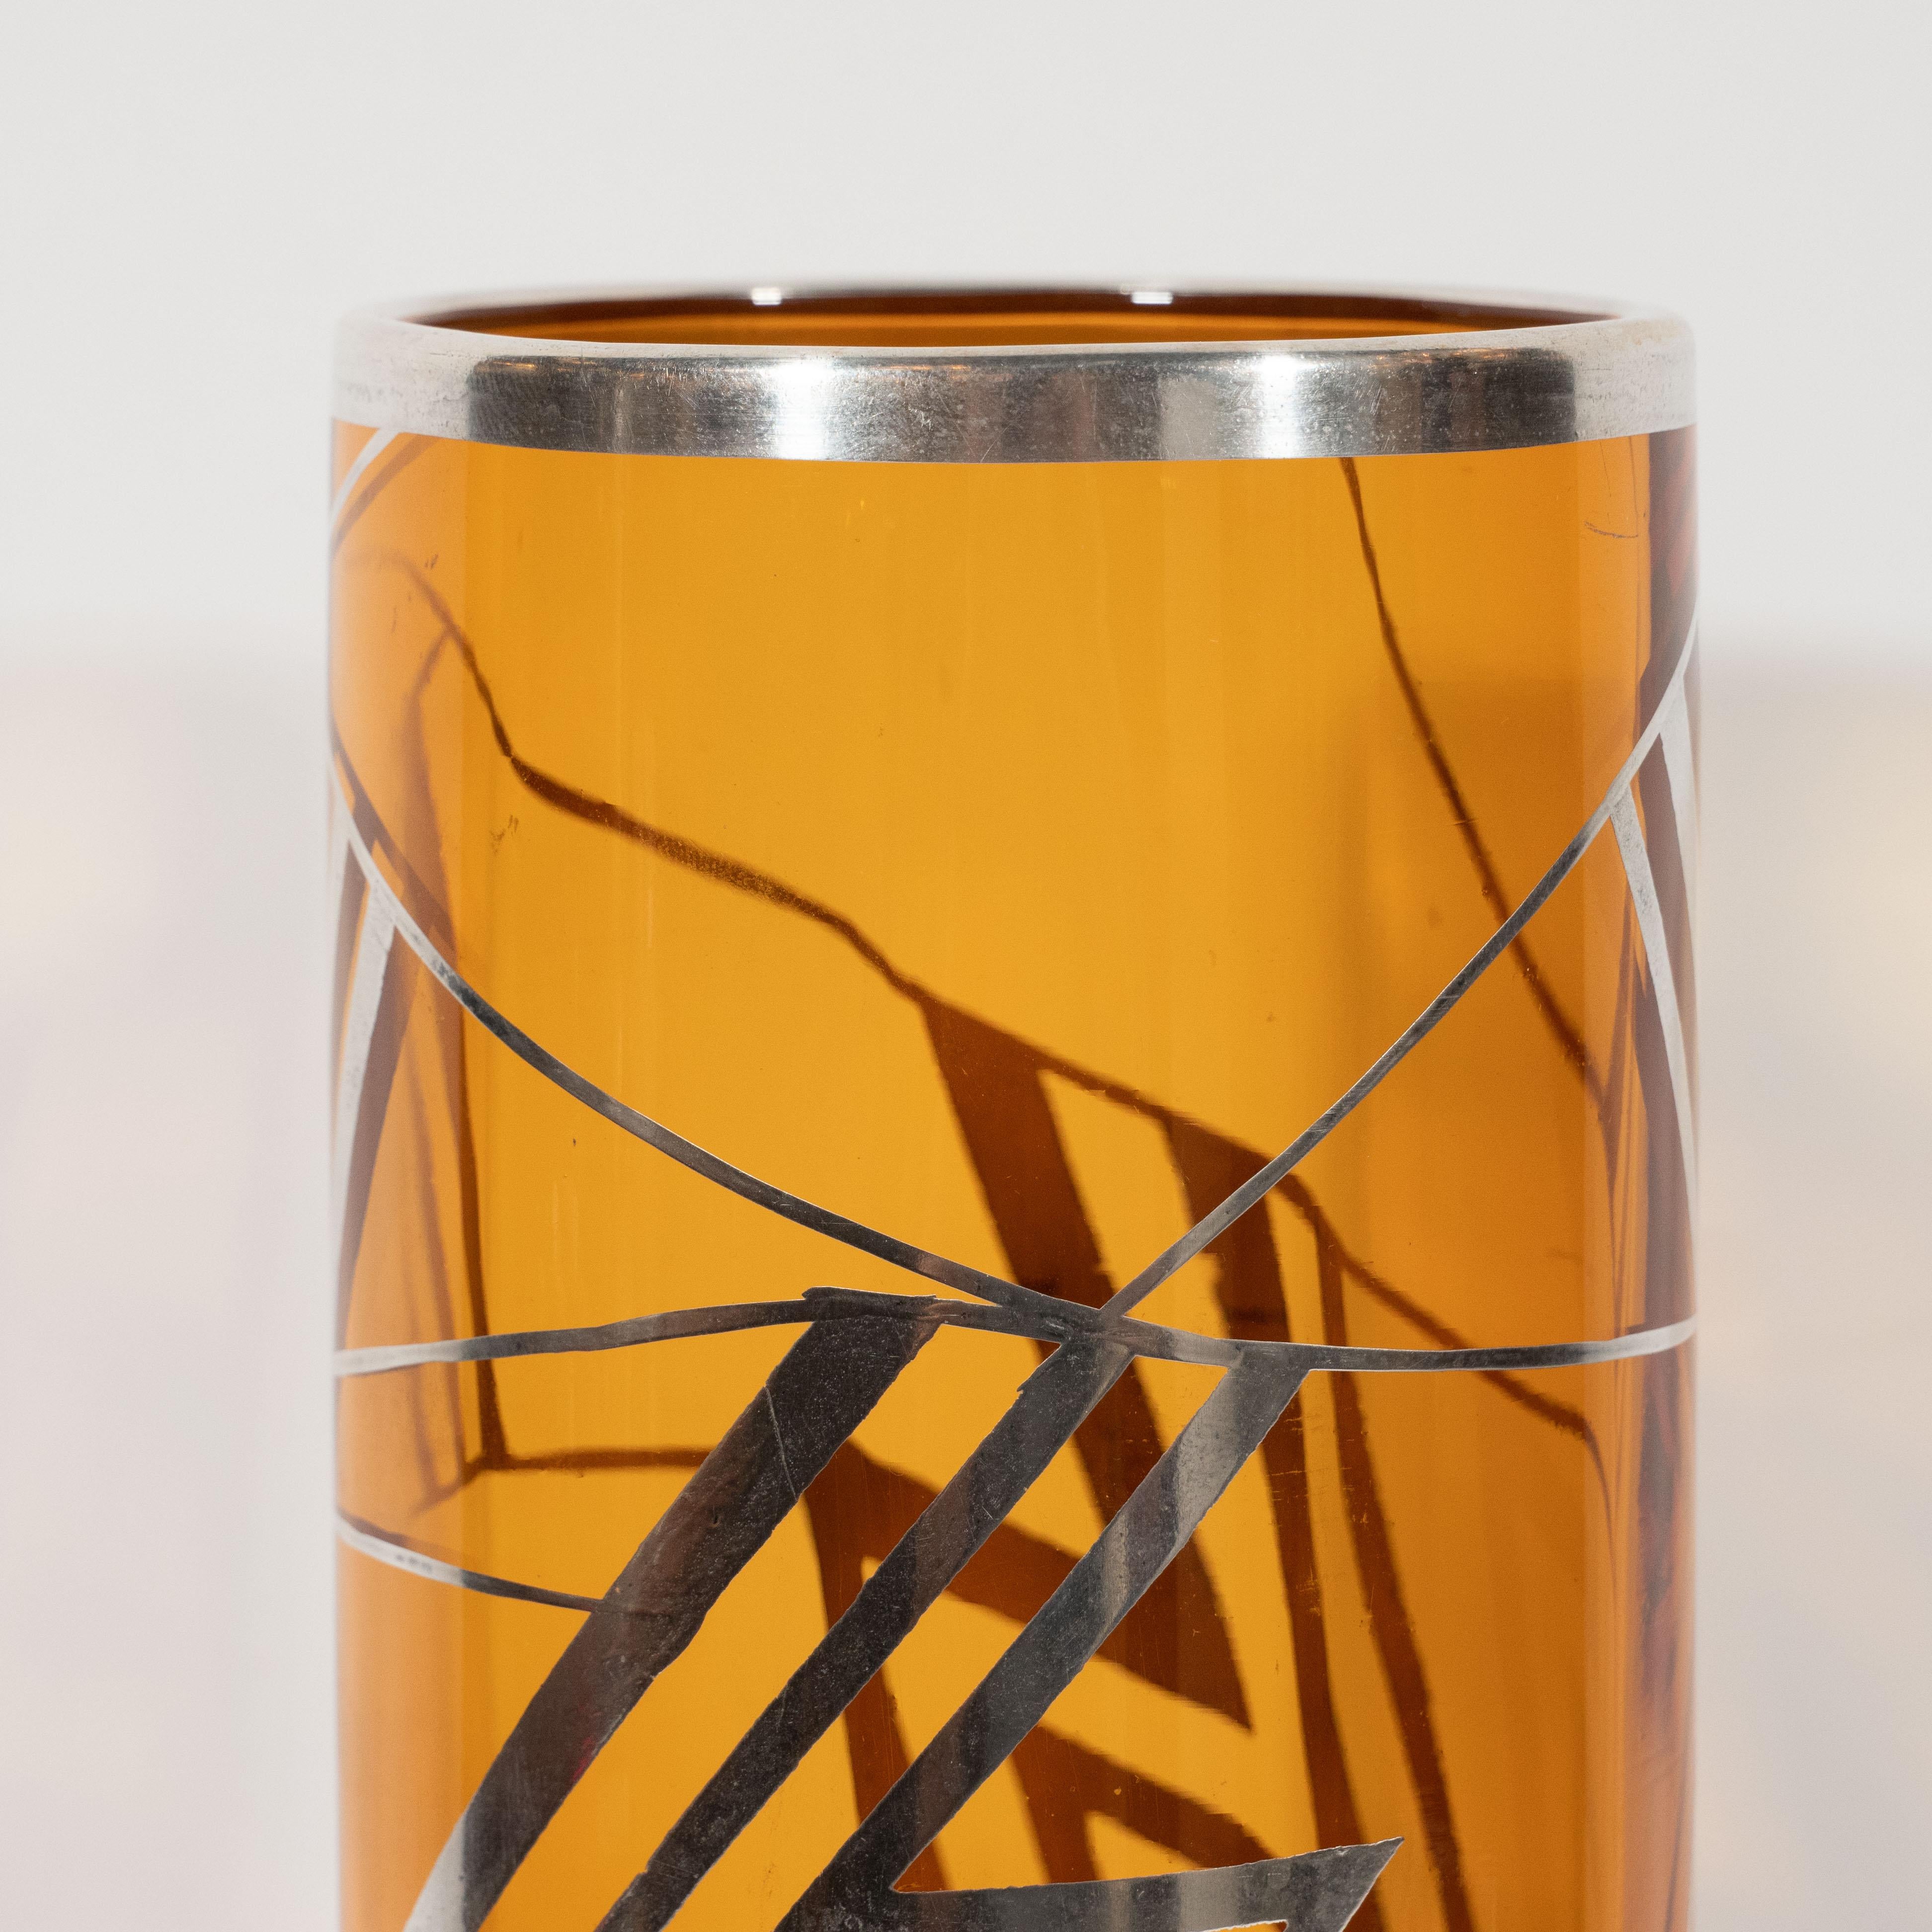 This beautiful glass vase was realized in France, circa 1935. It features a cylindrical body handblown in a rich brown topaz hue with overlaid geometric cubist designs- zig-zagging lines and triangular forms- hand-painted in sterling silver